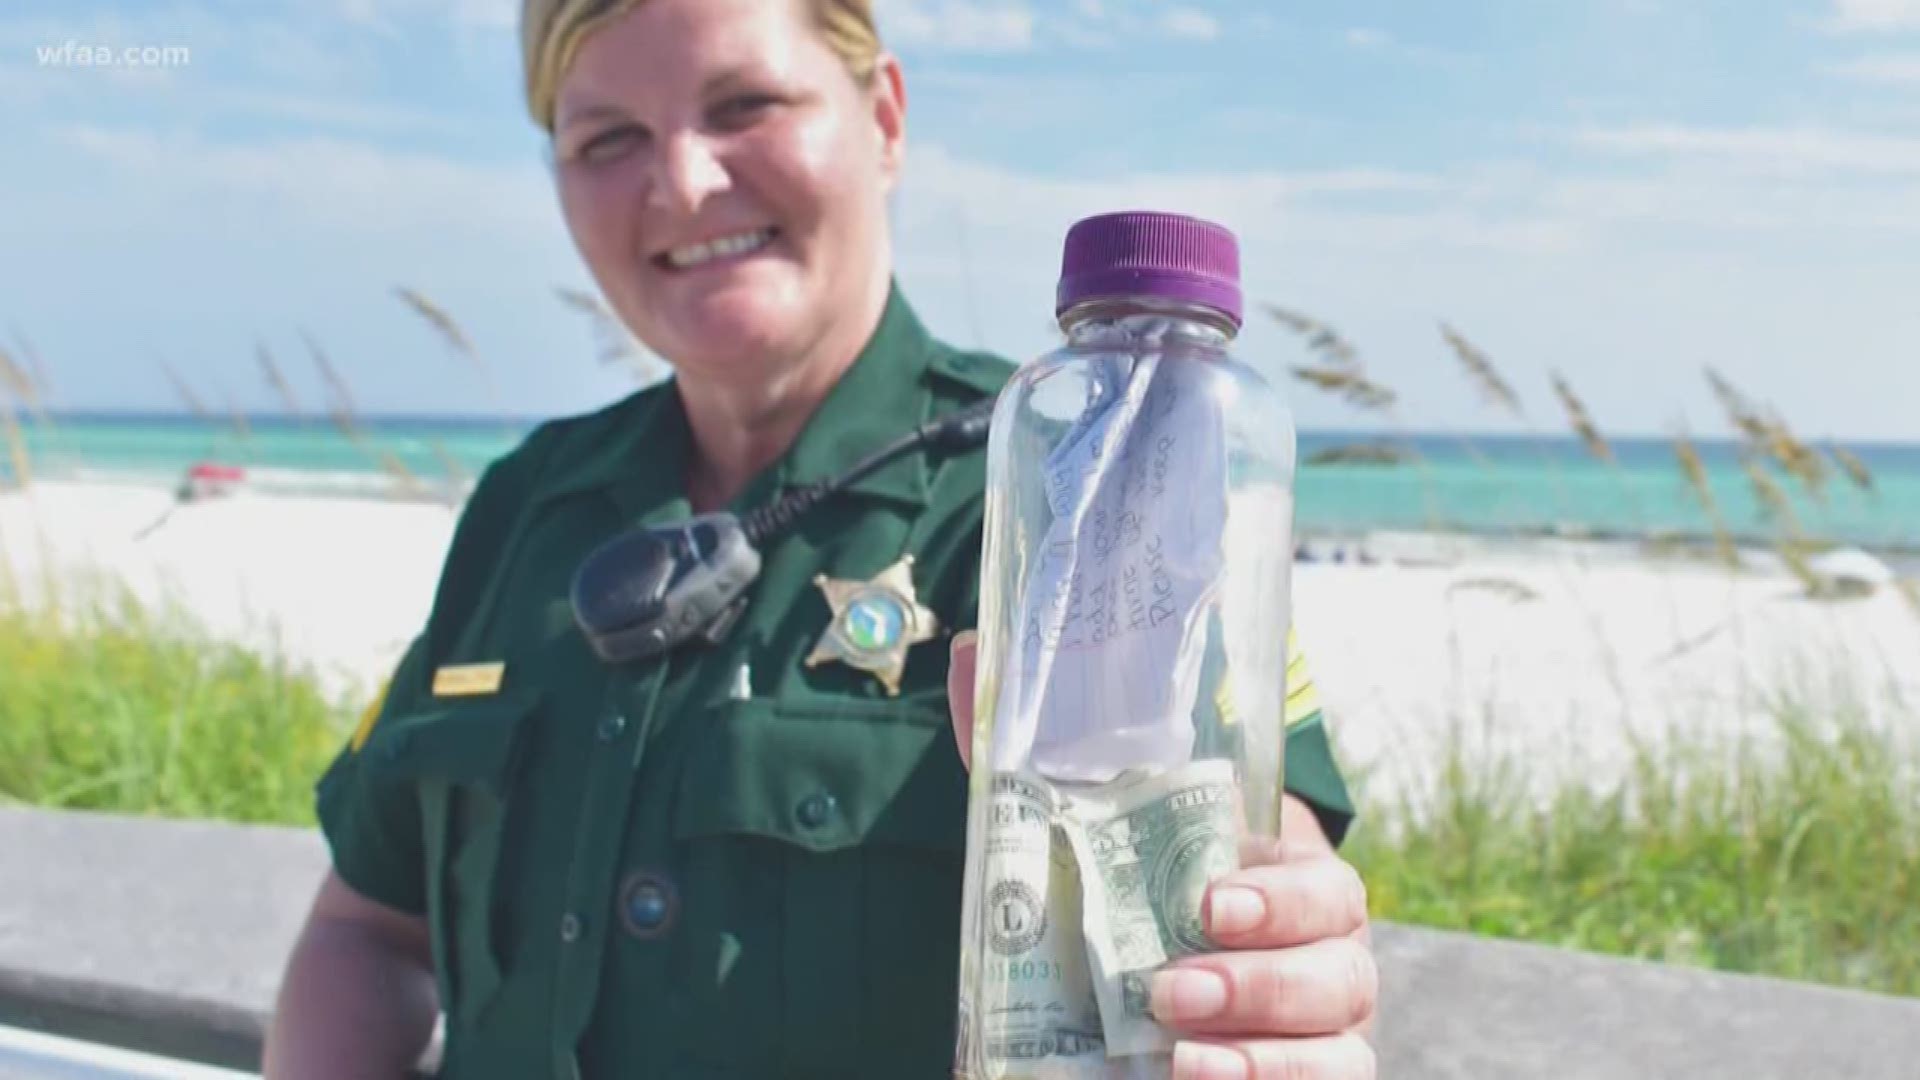 "This bottle contains the ashes of my son, Brian, who suddenly and unexpectedly passed on March 9, 2019. I'm sending him on one last adventure."